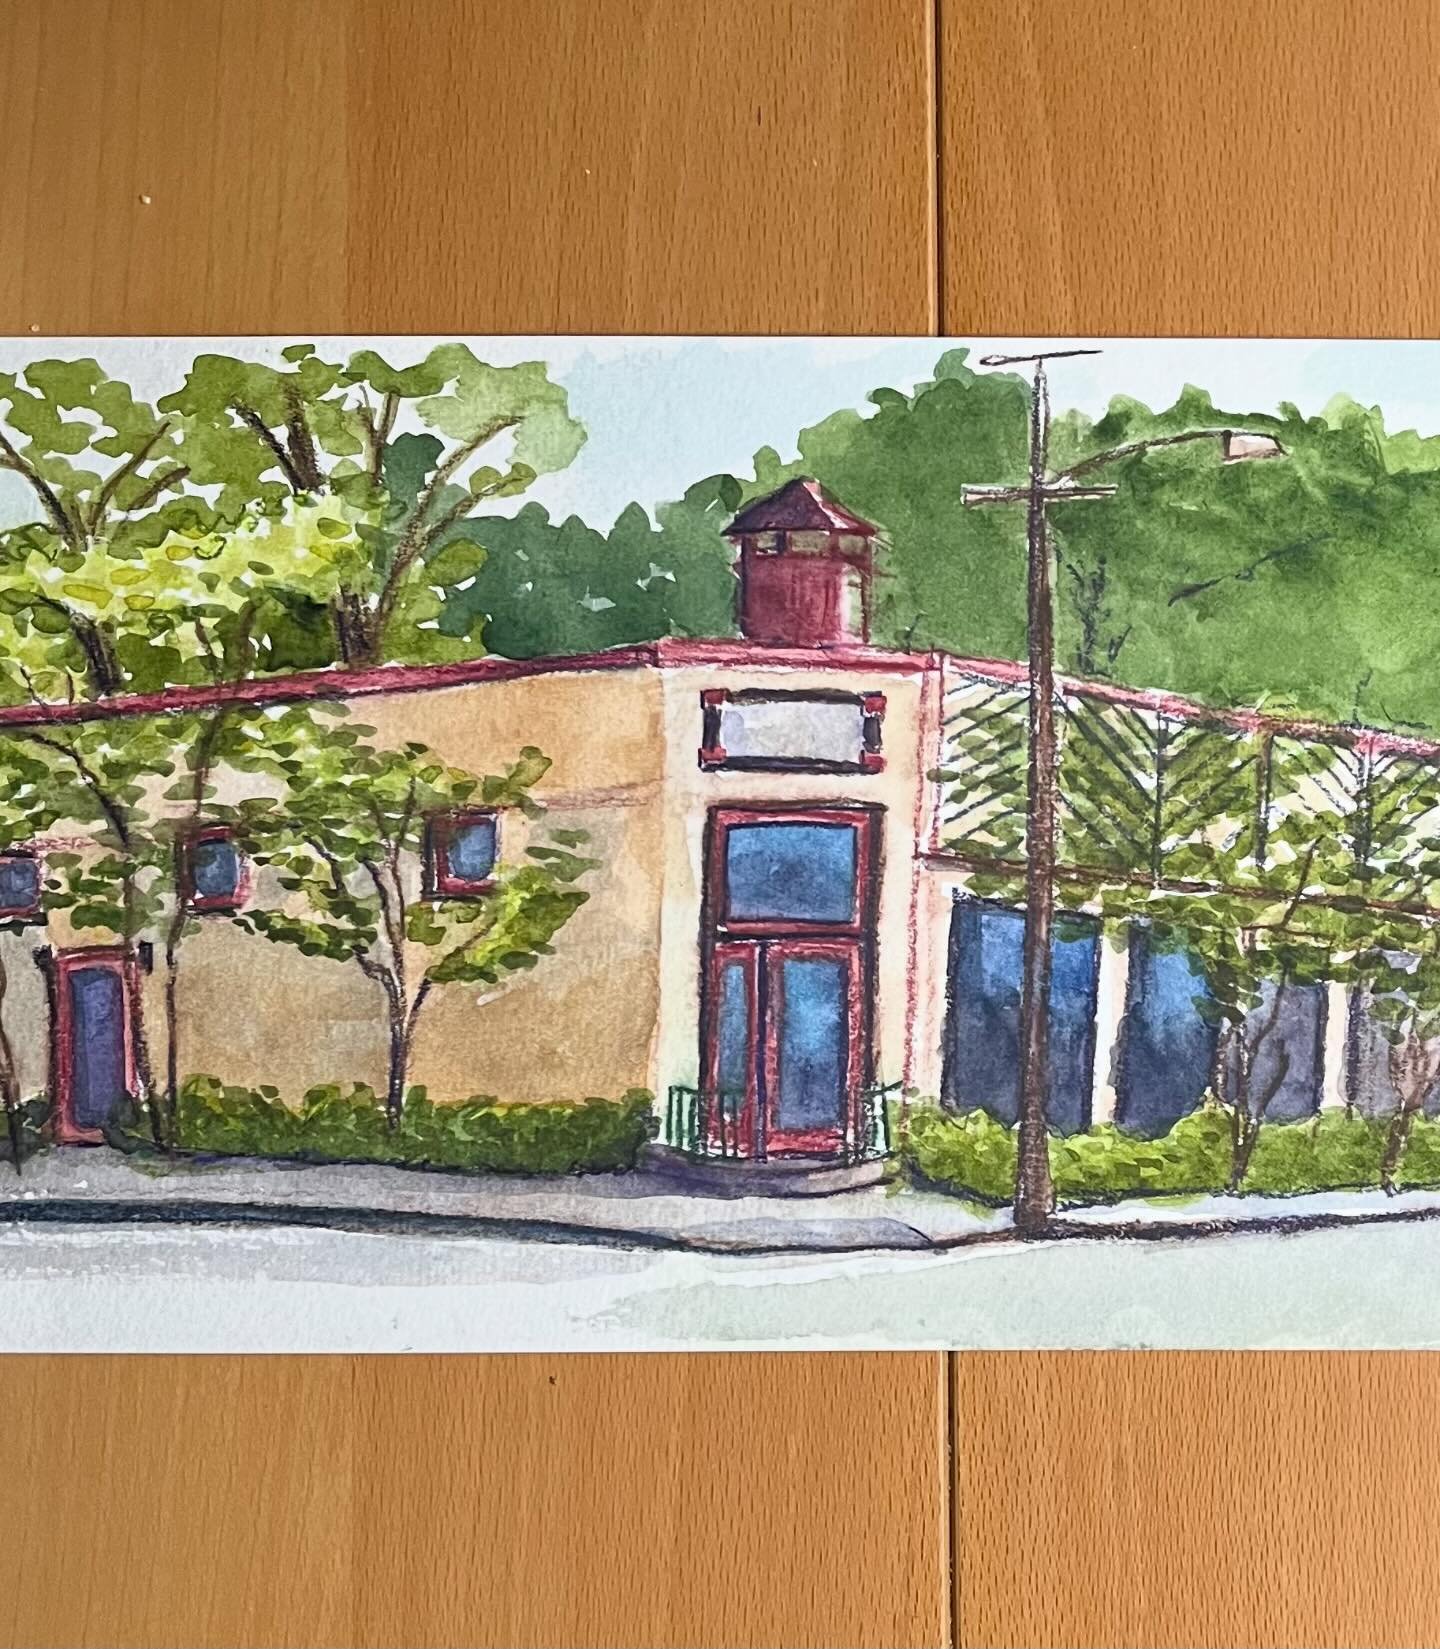 Memphis is so green right now. @marthakellyart and I experienced rain, sun and wind on our sketch outing today, plus cars arriving to block our view! We enjoyed all the curveballs of on-site drawing. I drew @tonica_memphis #sketchingnowbuildings #ske